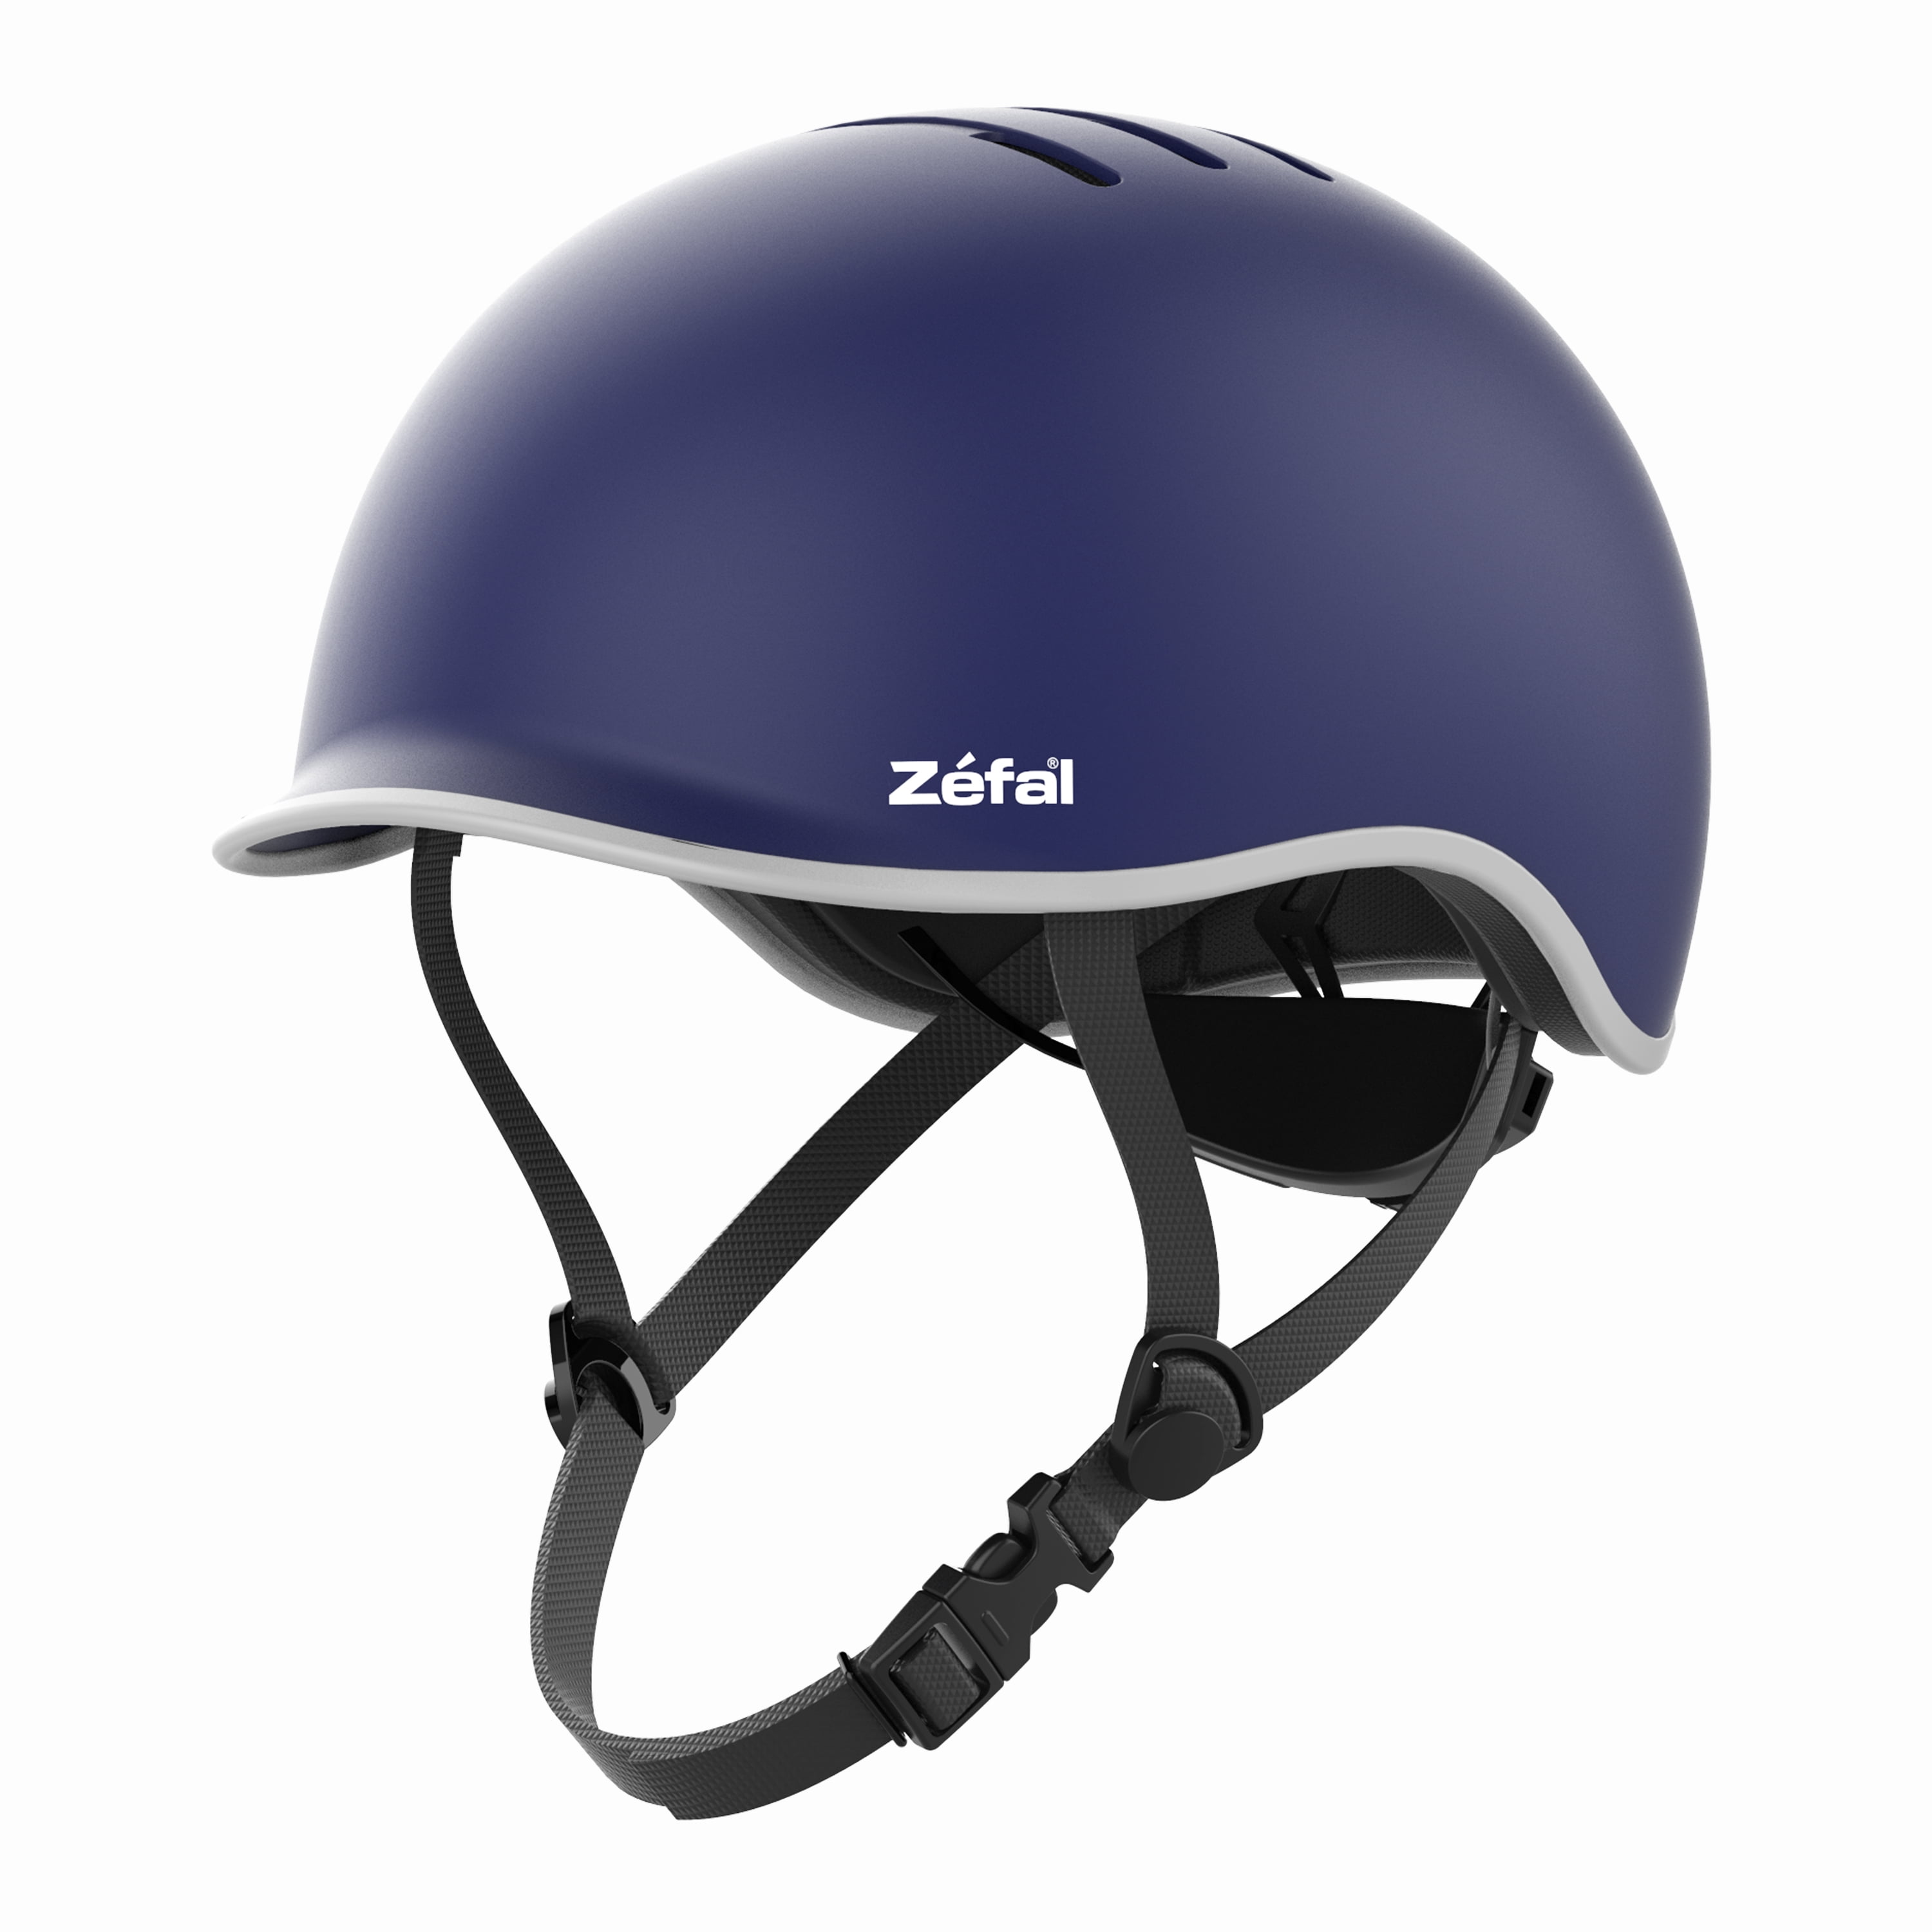 Thousands of adult bike helmets recalled because they may not